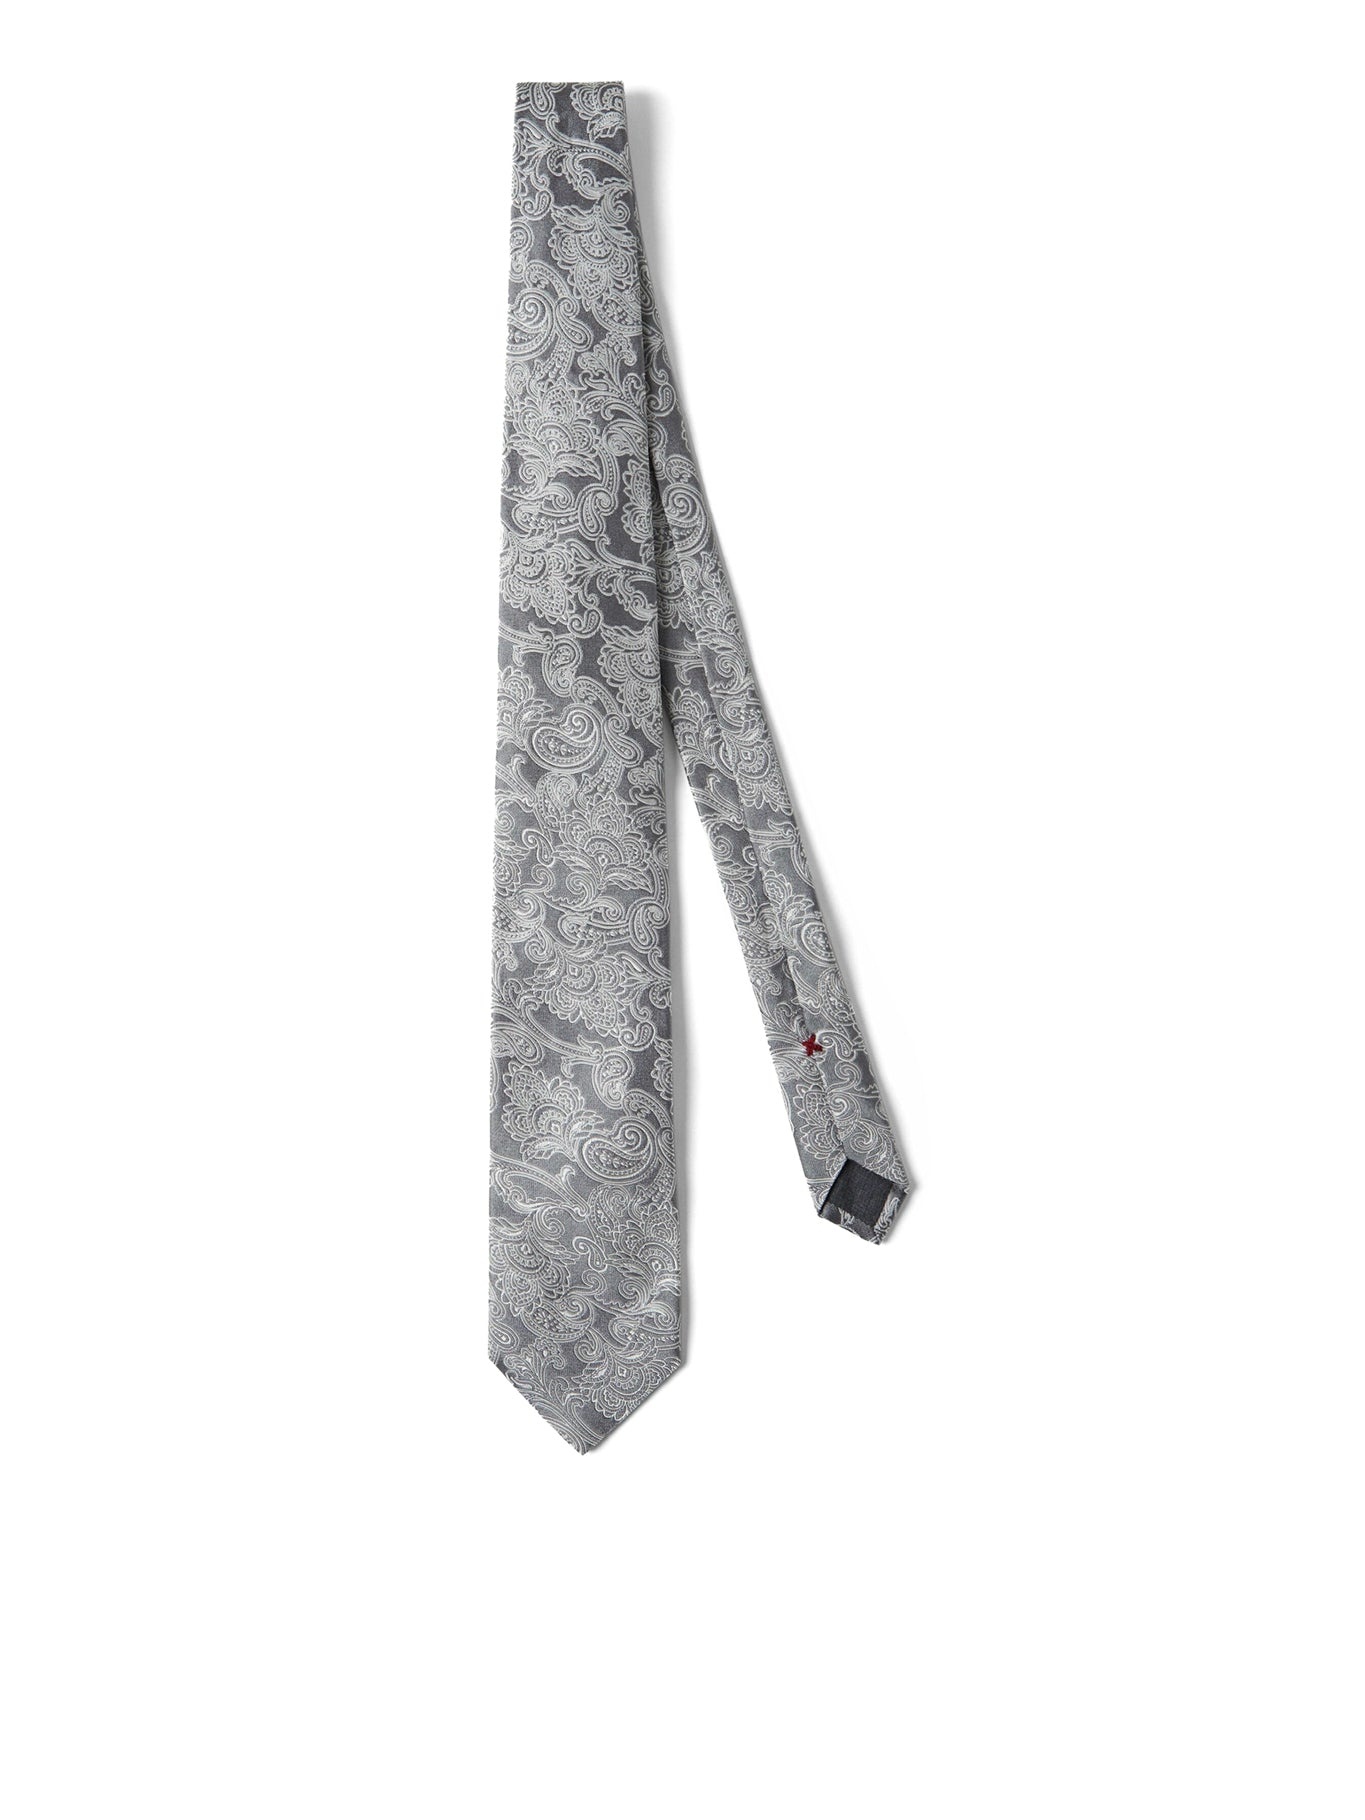 TIE WITH JACQUARD EFFECT - 1